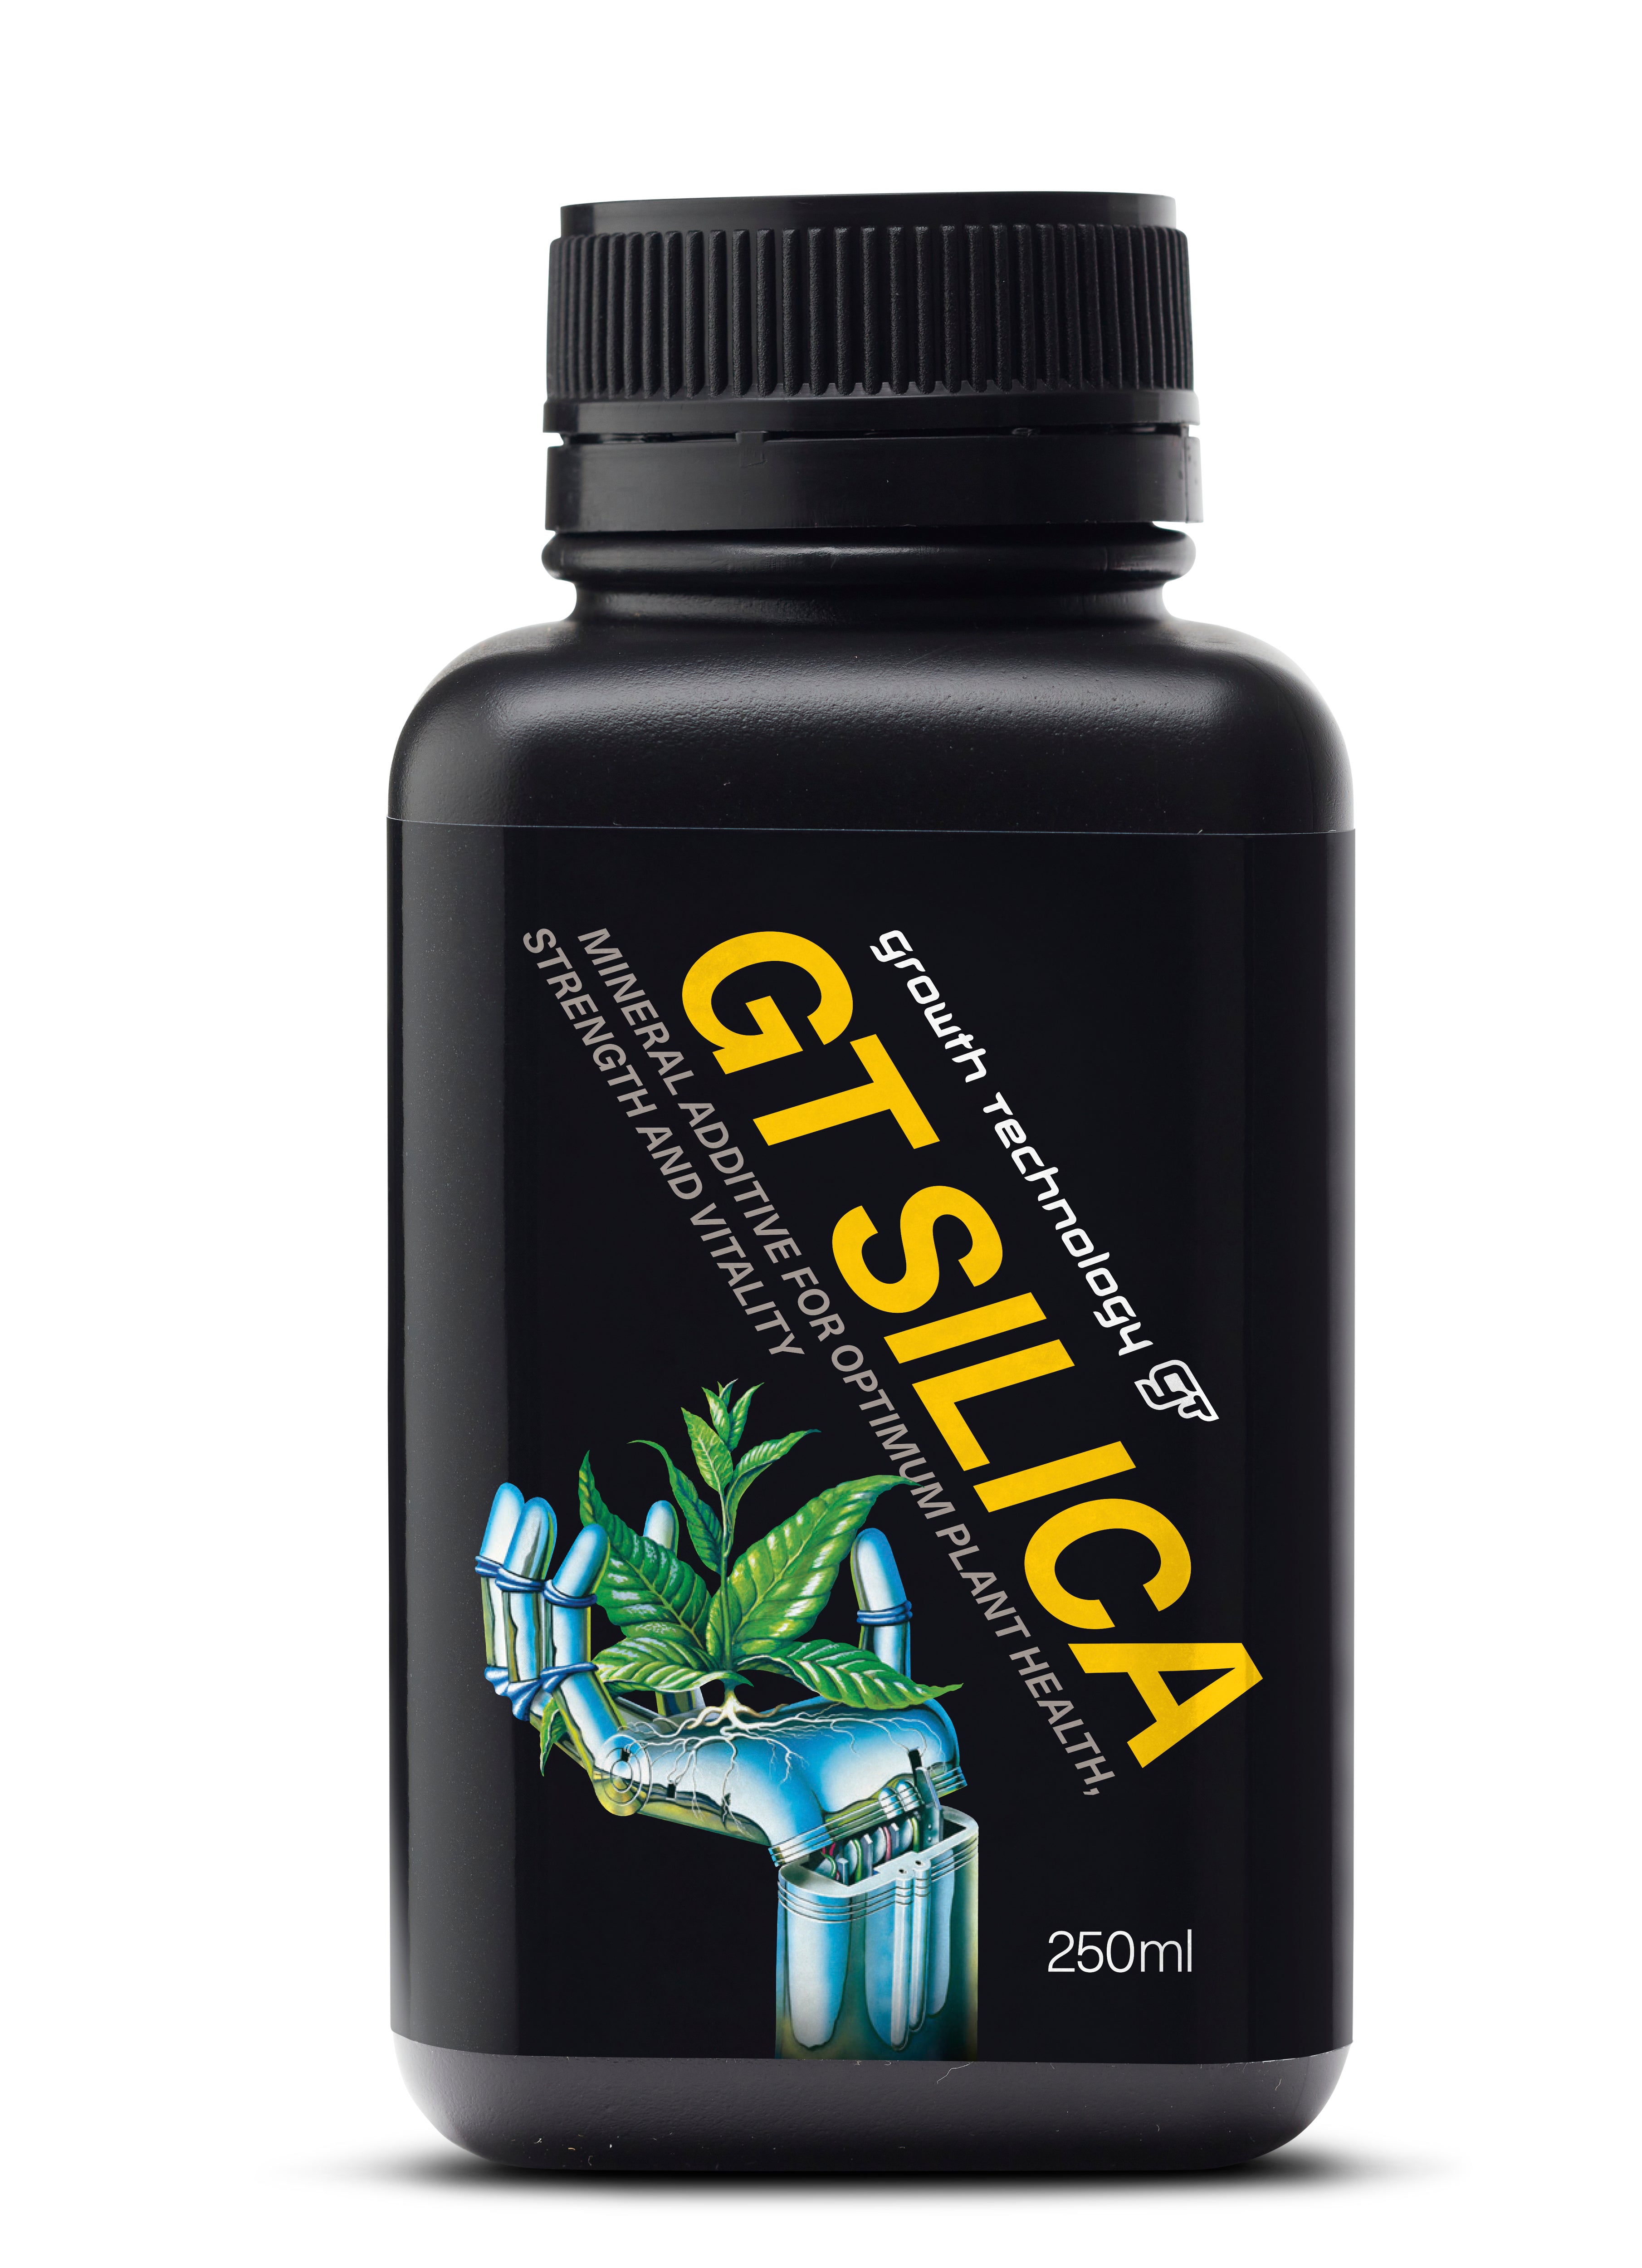 GT Silica. Soluble Silica Concentrate for Hydroponic